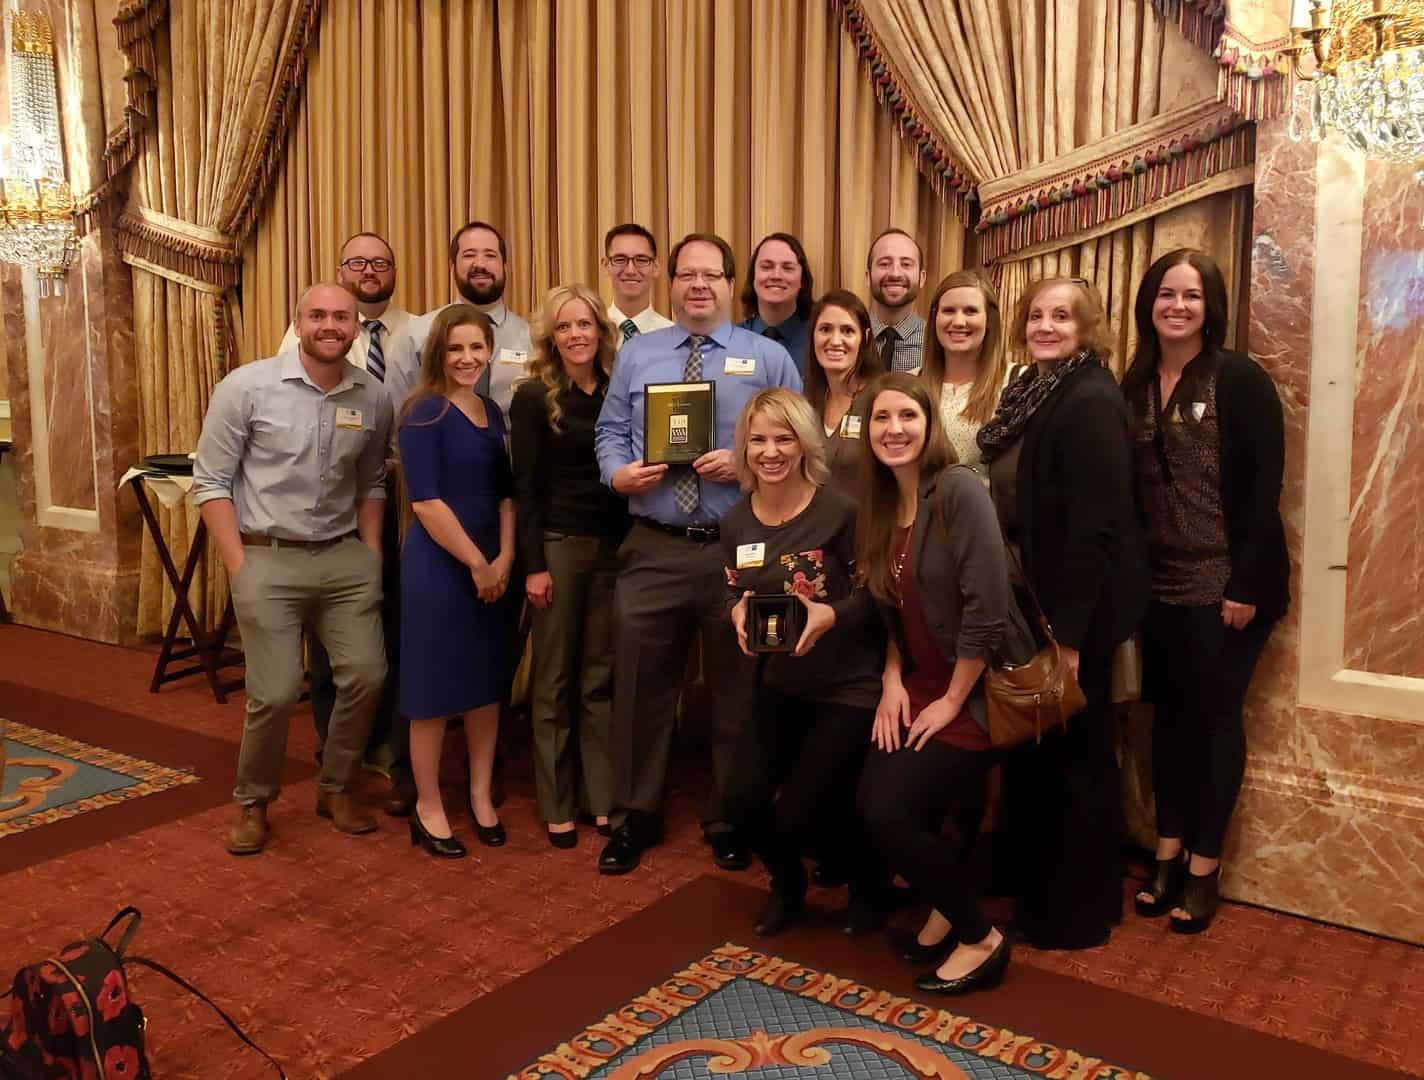 BKA Content One Of Utah’s Top 100 Fastest Growing Companies 4 Years In A Row